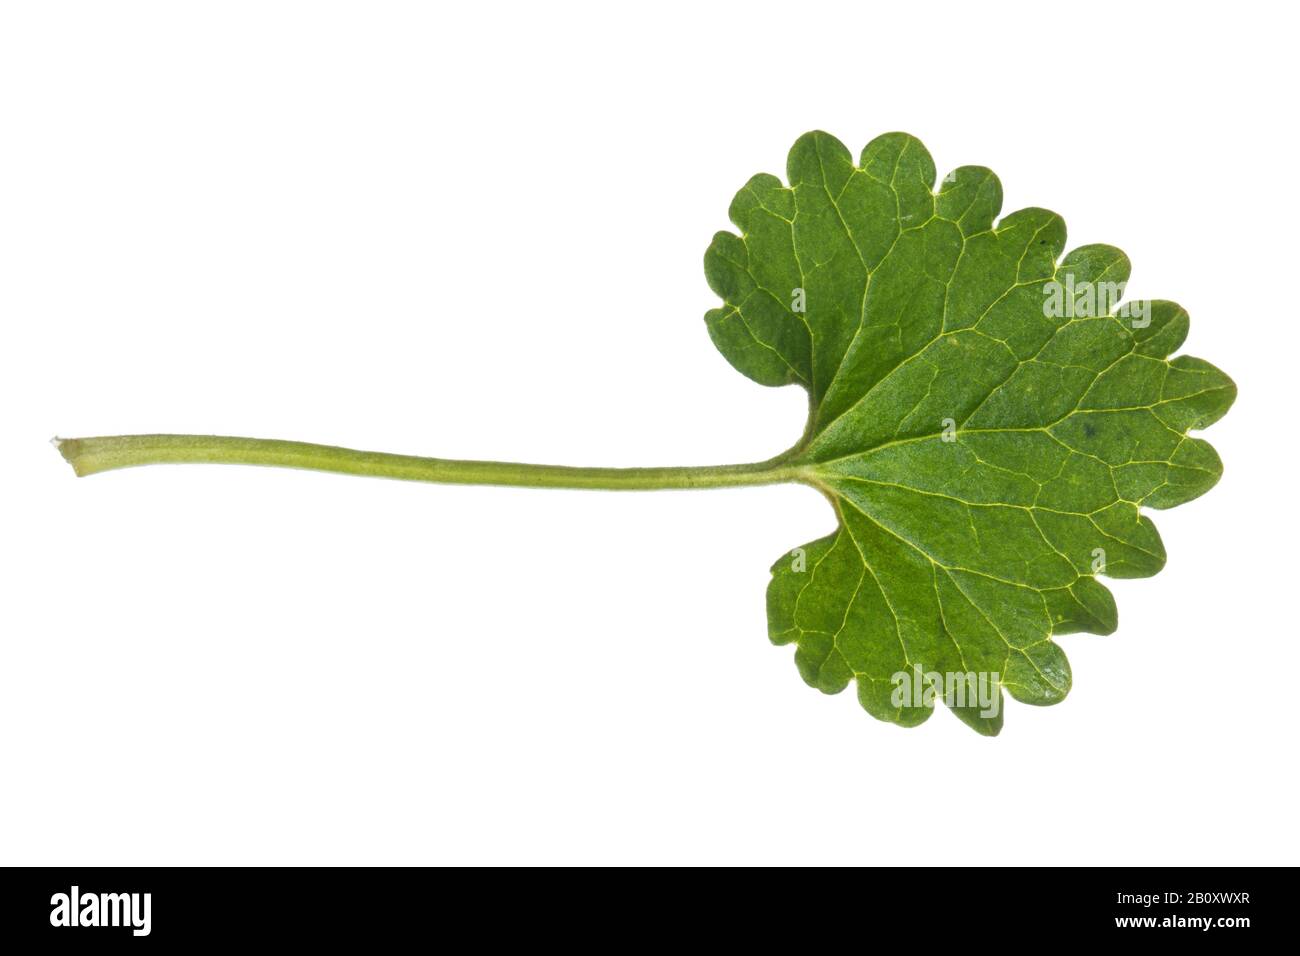 gill-over-the-ground, ground ivy (Glechoma hederacea), leaf, cutout, Germany Stock Photo